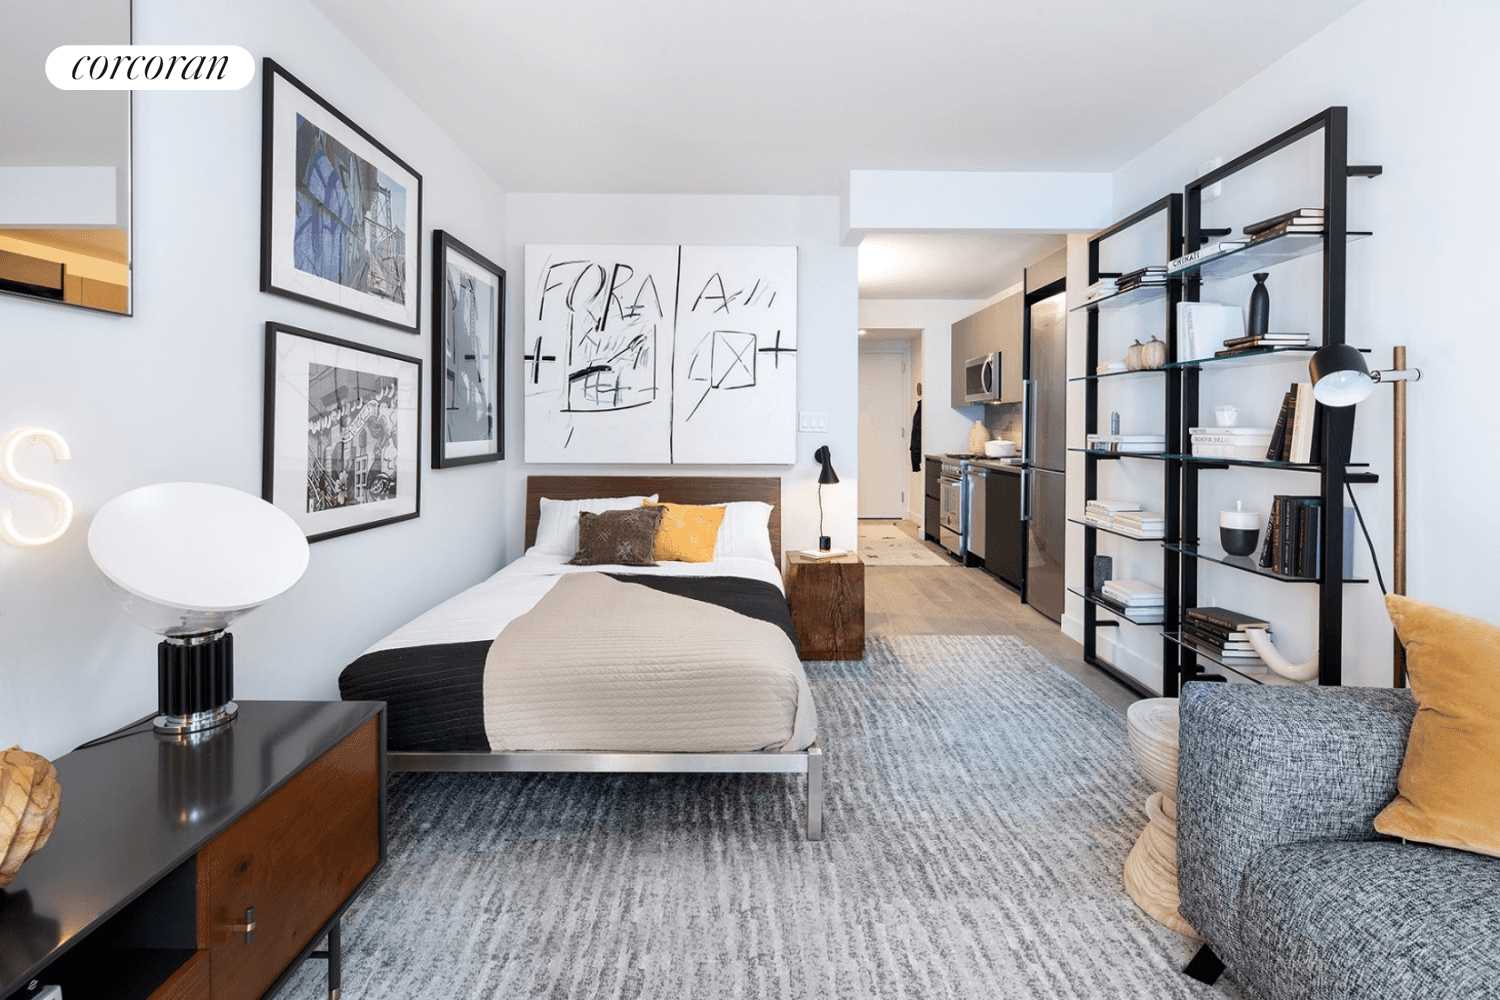 420 Kent Phase 2. Staycation RefinedPrivate in person amp ; virtual showings of this one of a kind studio apartment are available.